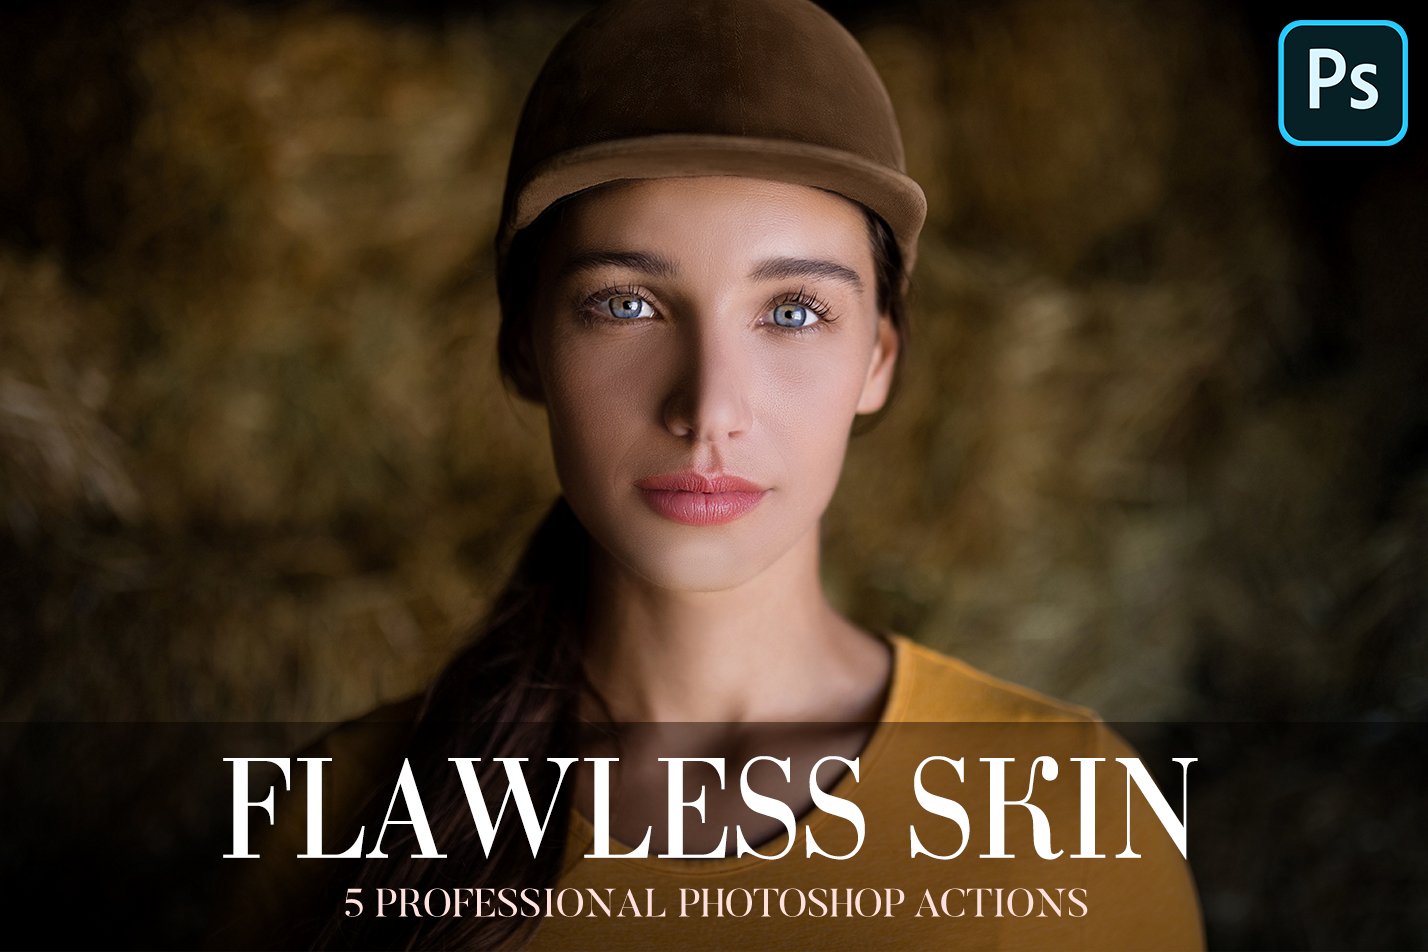 Photoshop Actions - Flawless Skincover image.